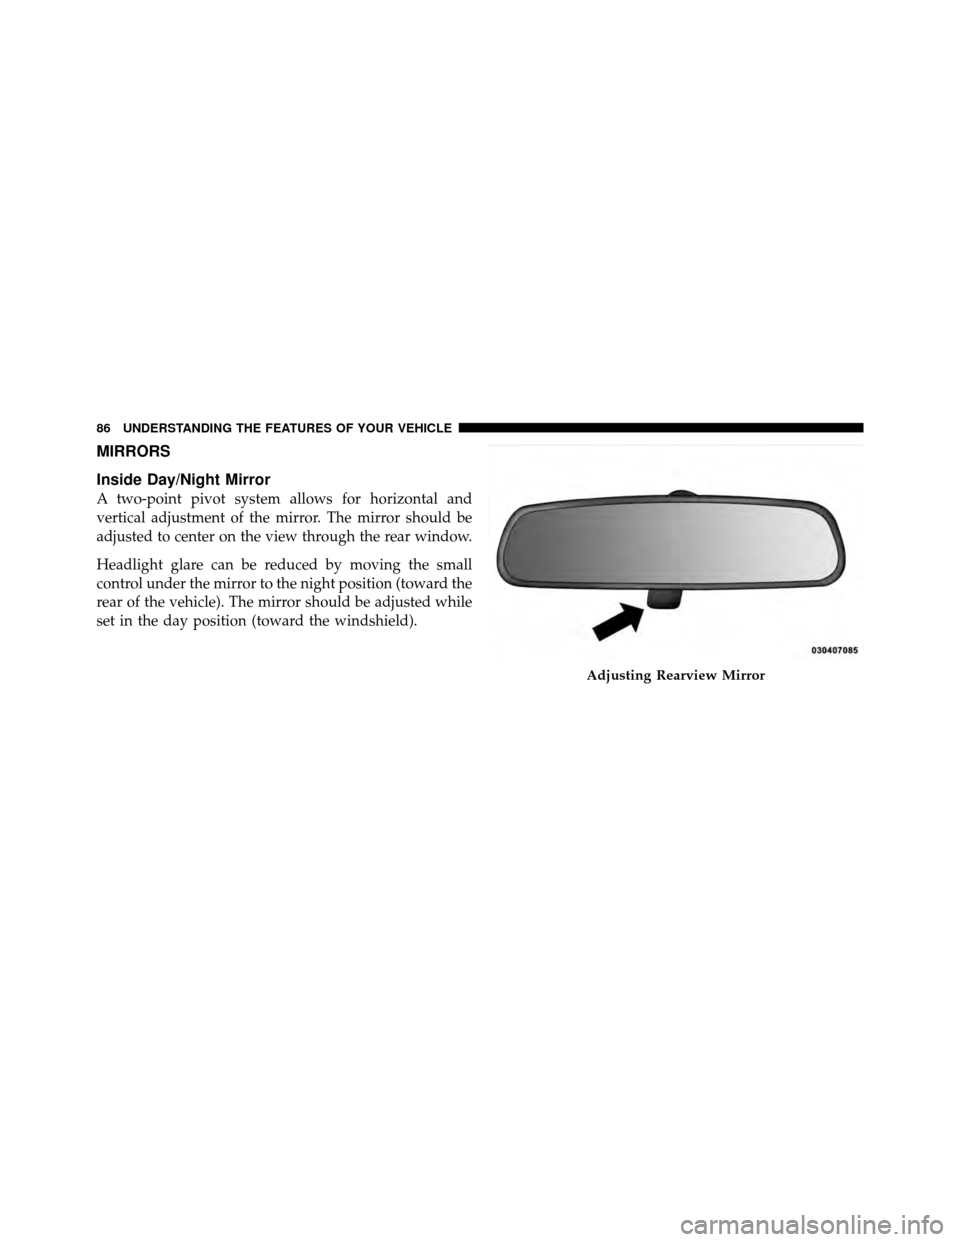 JEEP WRANGLER 2010 JK / 3.G Owners Manual MIRRORS
Inside Day/Night Mirror
A two-point pivot system allows for horizontal and
vertical adjustment of the mirror. The mirror should be
adjusted to center on the view through the rear window.
Headl